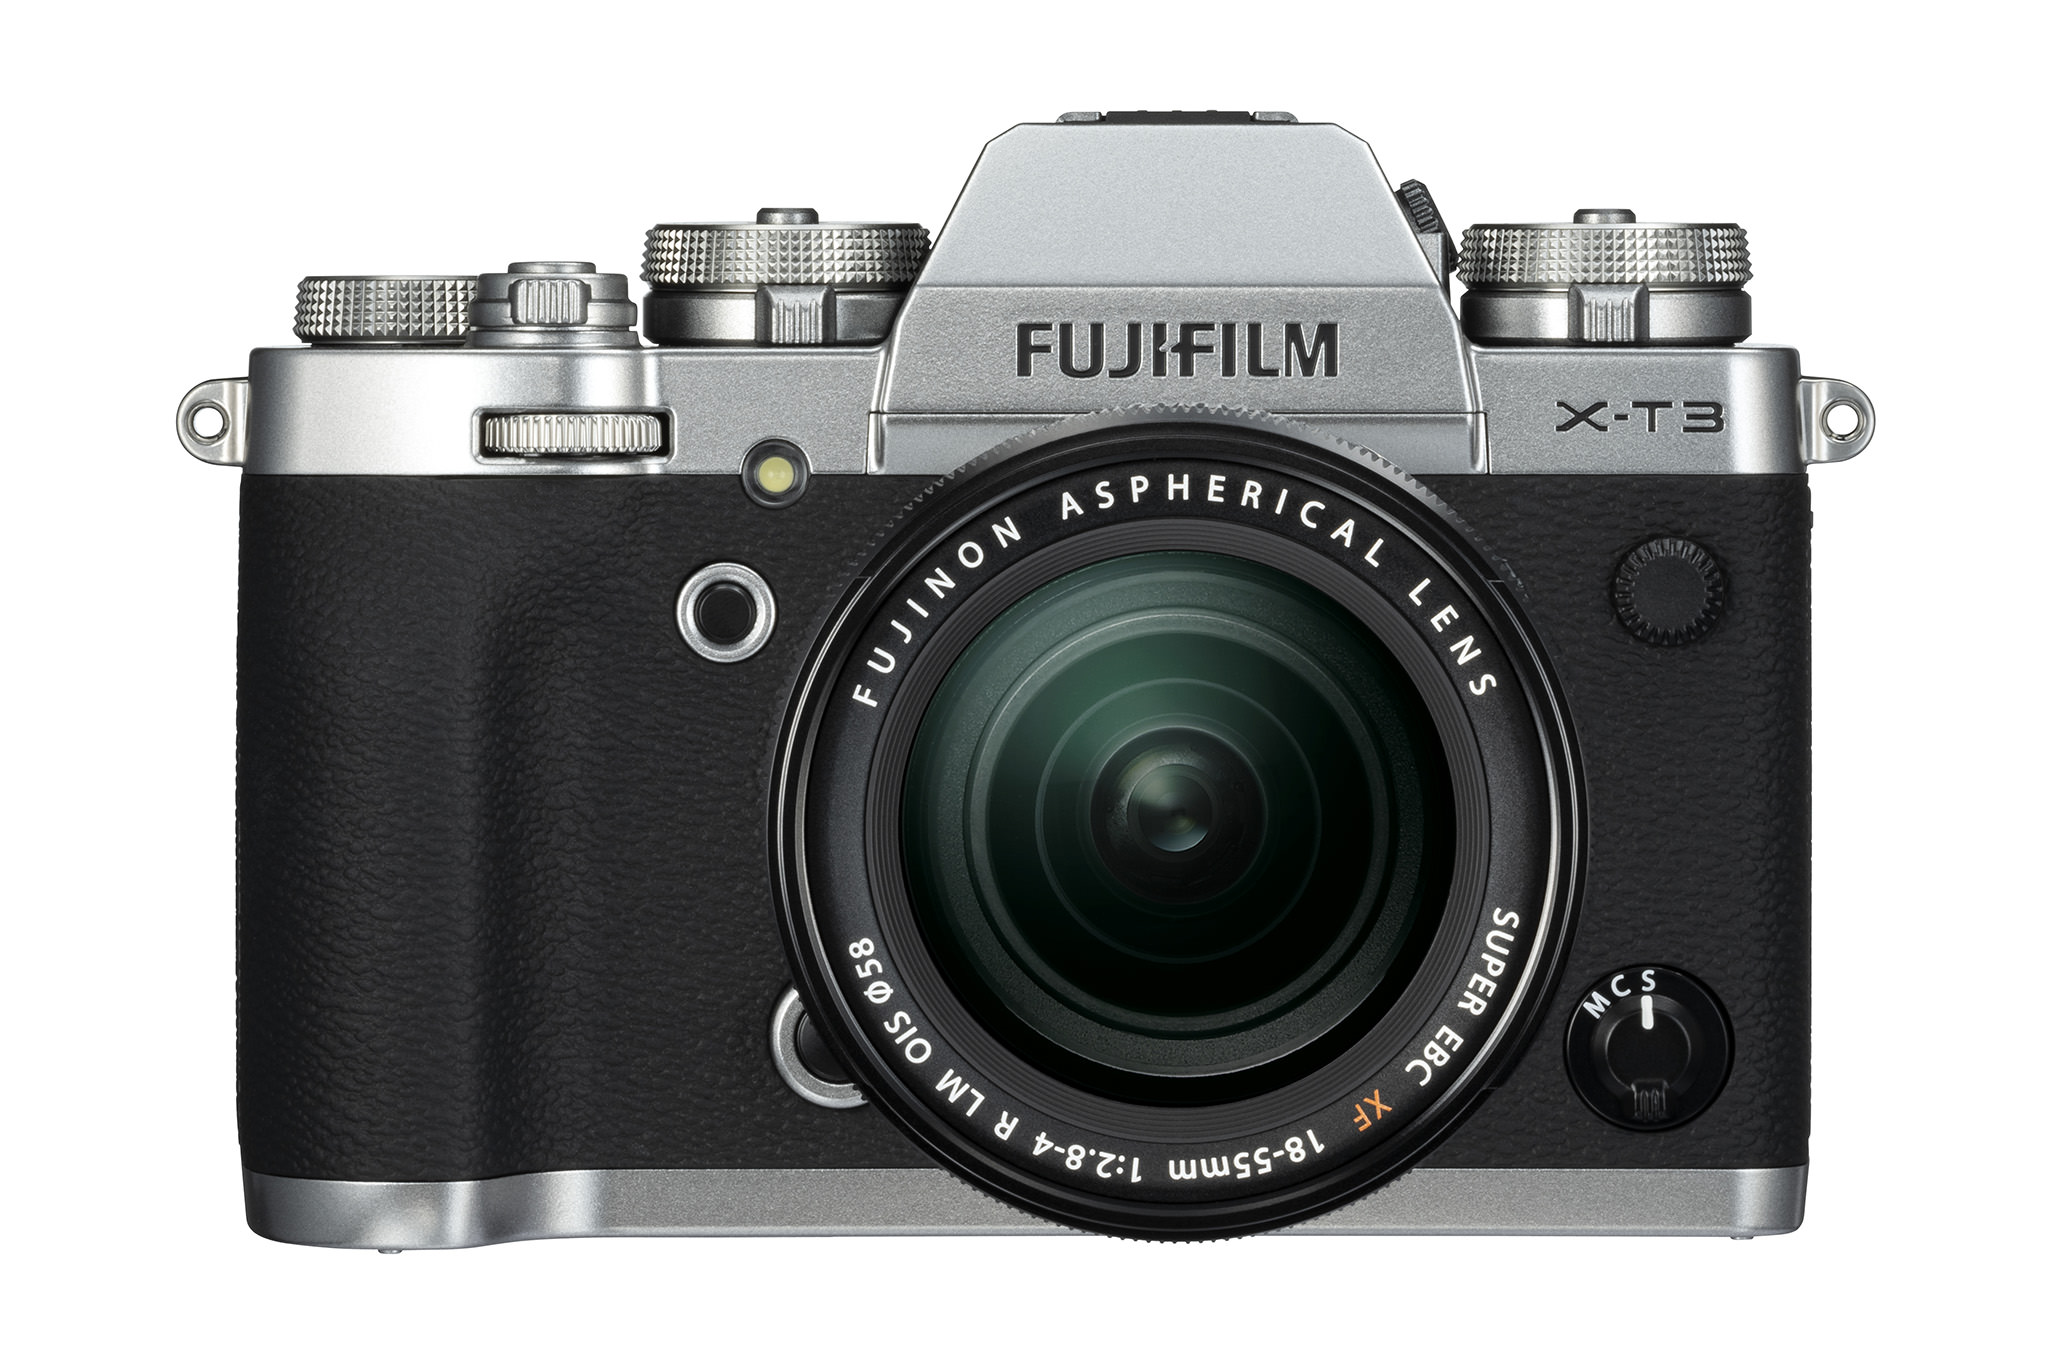 Fuji X-T3 Review - AF Performance, Metering and IQ